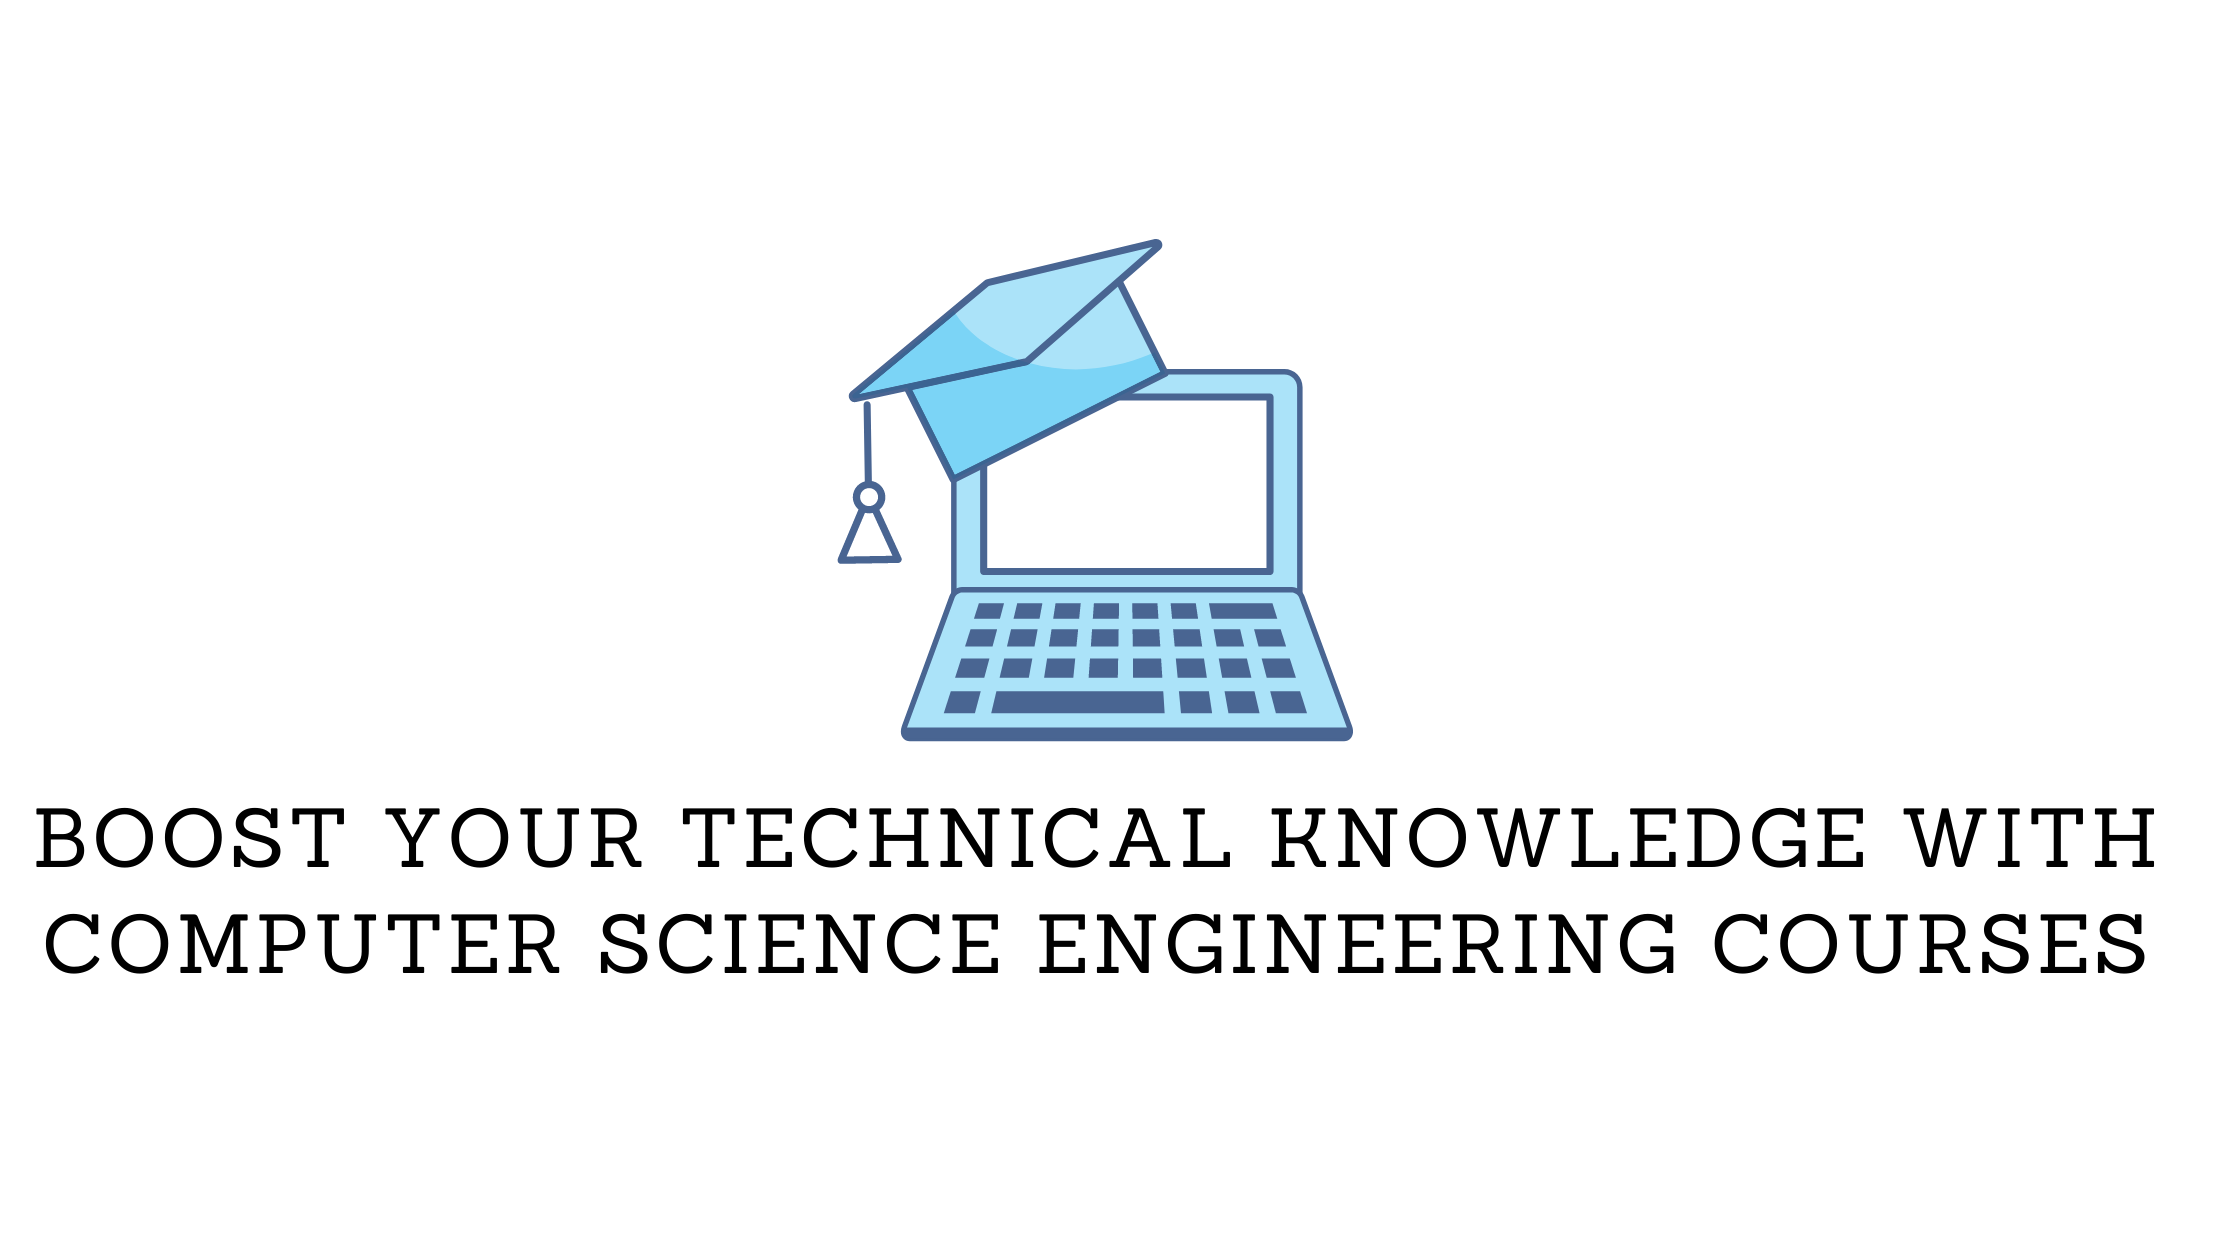 Boost your technical knowledge with Computer science engineering courses